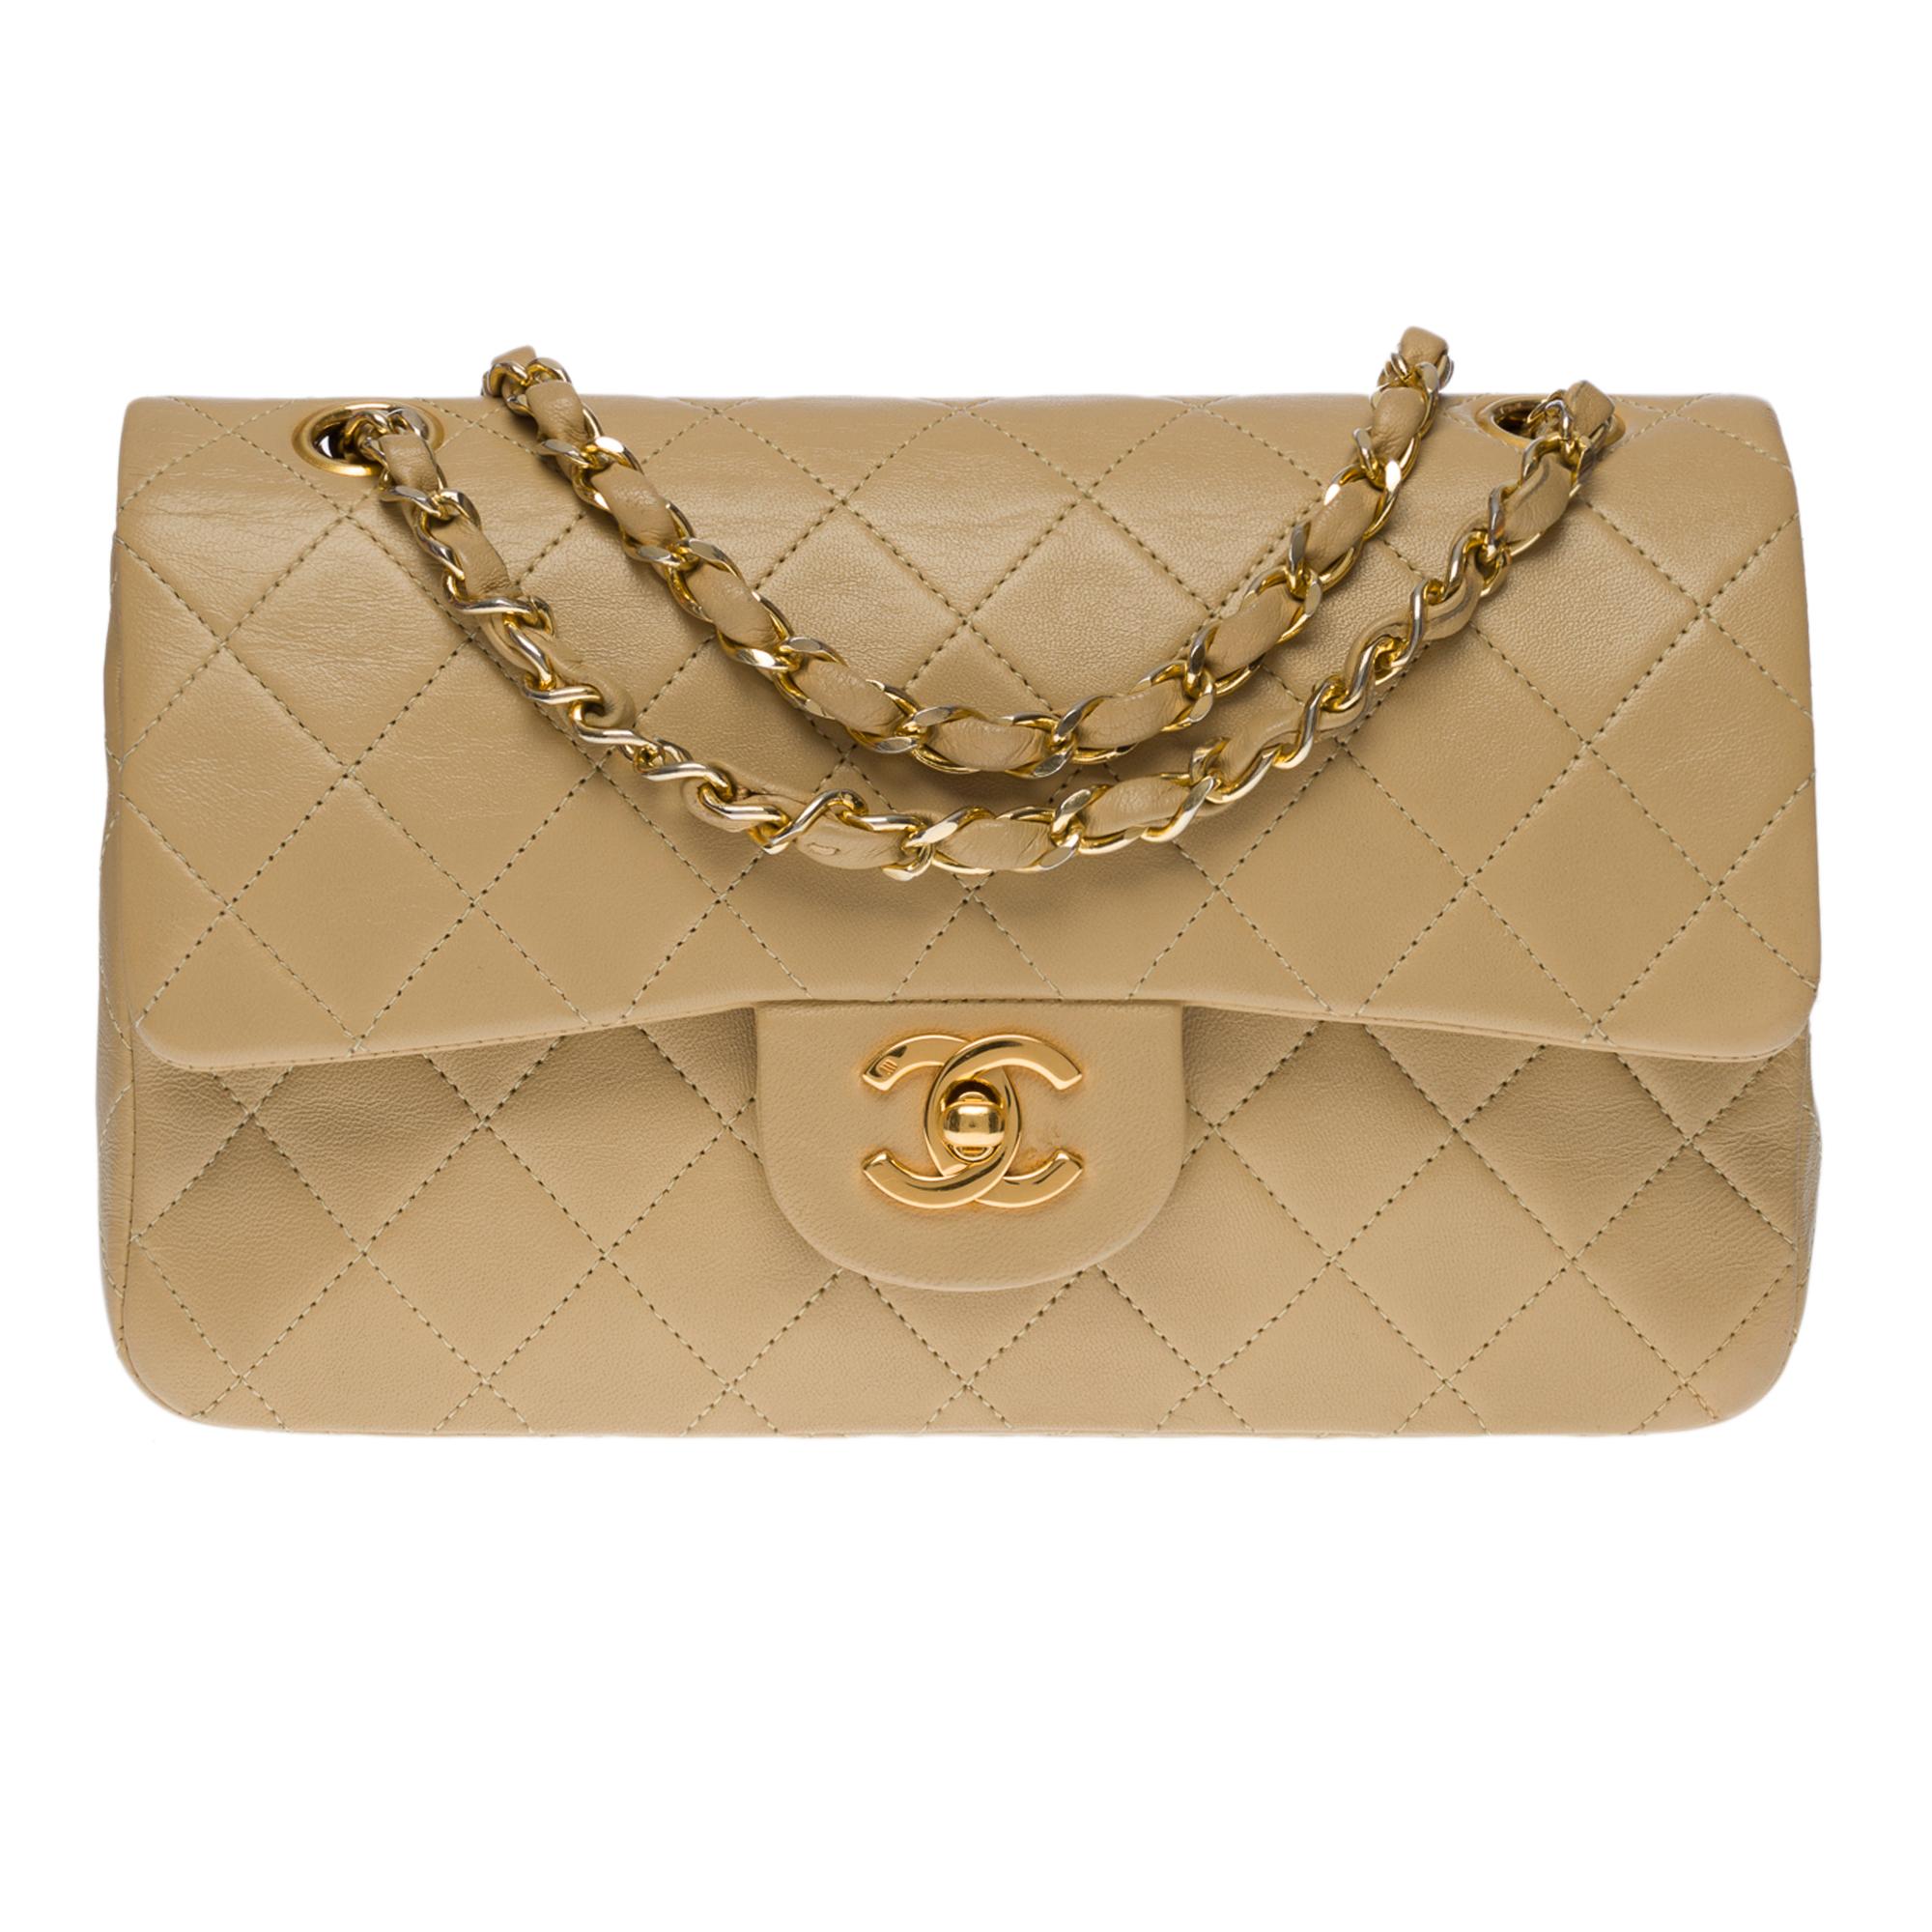 The coveted Chanel Timeless 23 cm bag with double flap in beige quilted leather, gold-tone hardware, a gold-tone metal chain handle interlaced with beige leather for shoulder and shoulder strap
Backpack pocket
Flap closure, gold CC logo clasp
Double